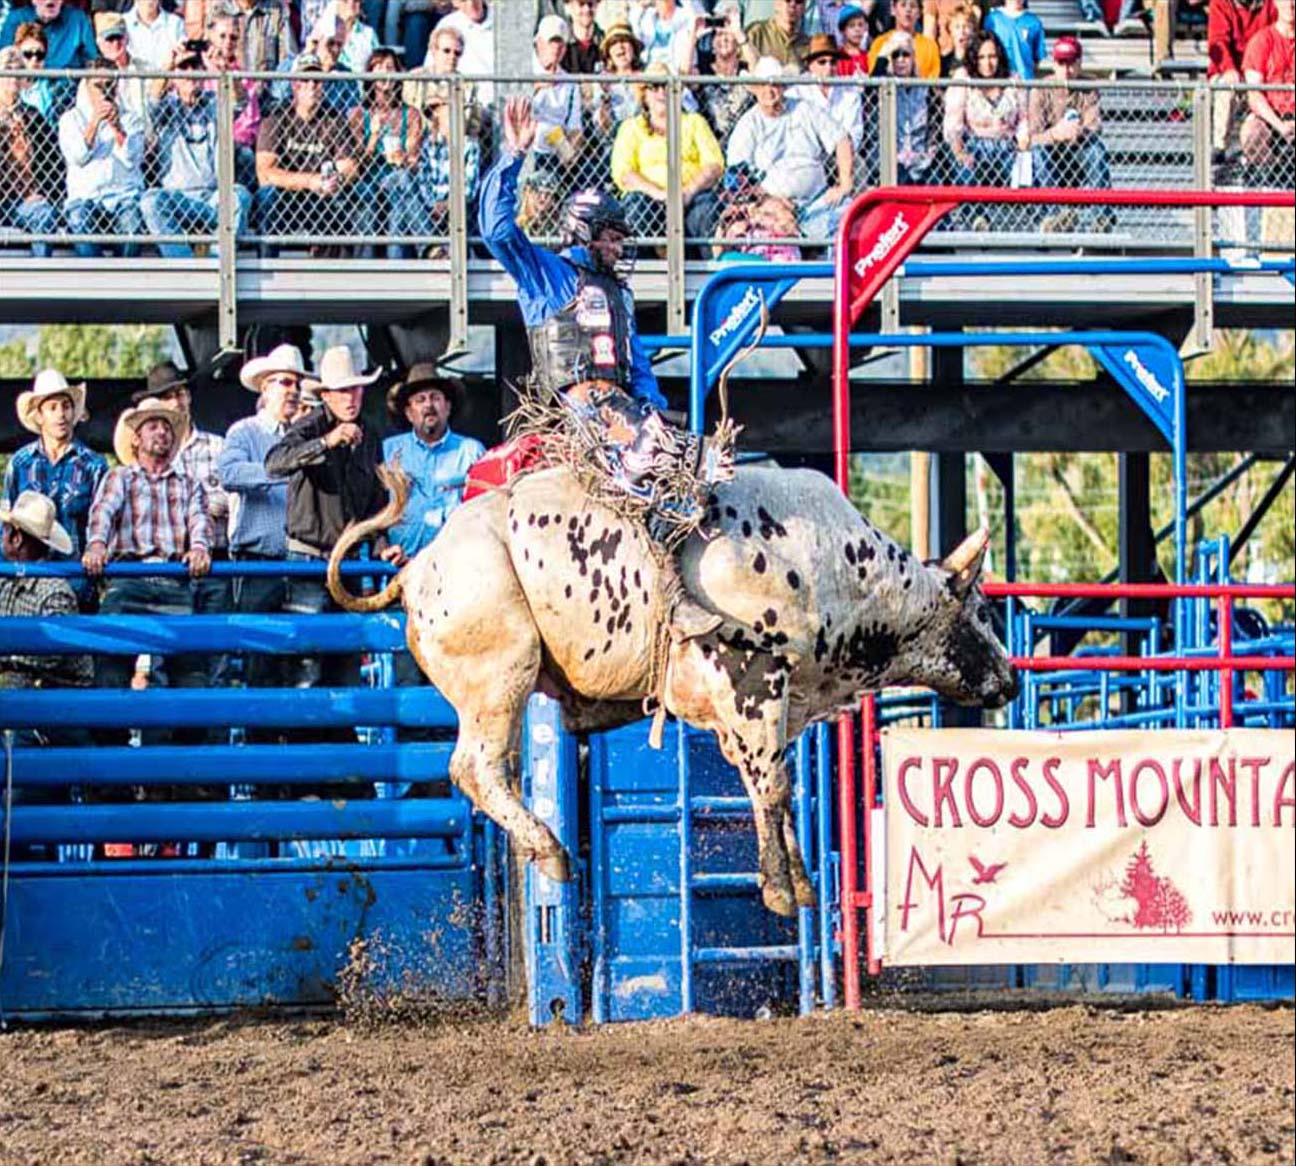 Bull rider takes to the air by Mark Ruckman